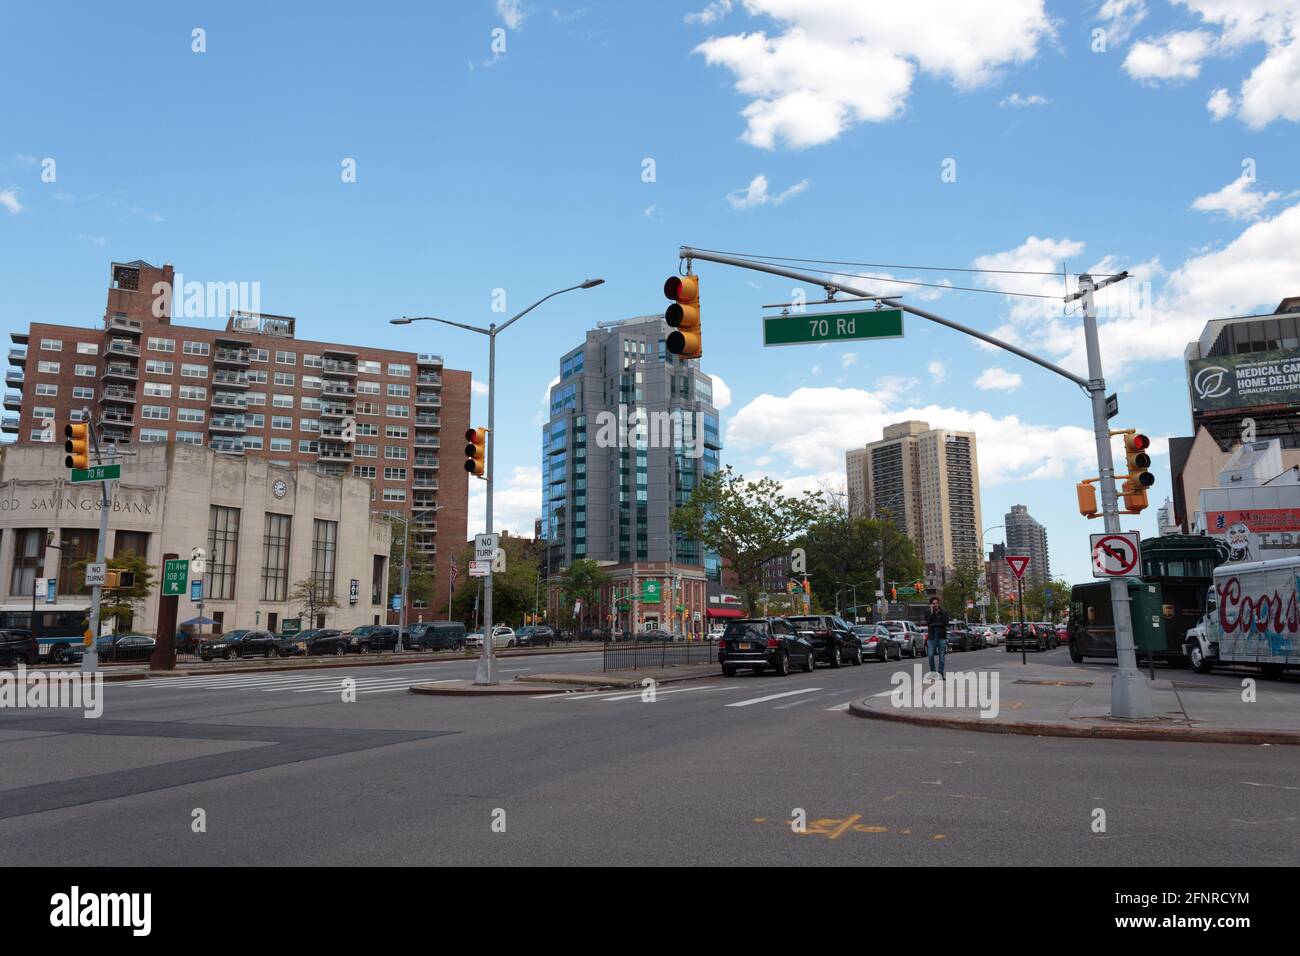 intersection of Queens Boulevard and 70th road in Forest Hills, Queens, New York, Ridgewood Savings Bank on the left Stock Photo